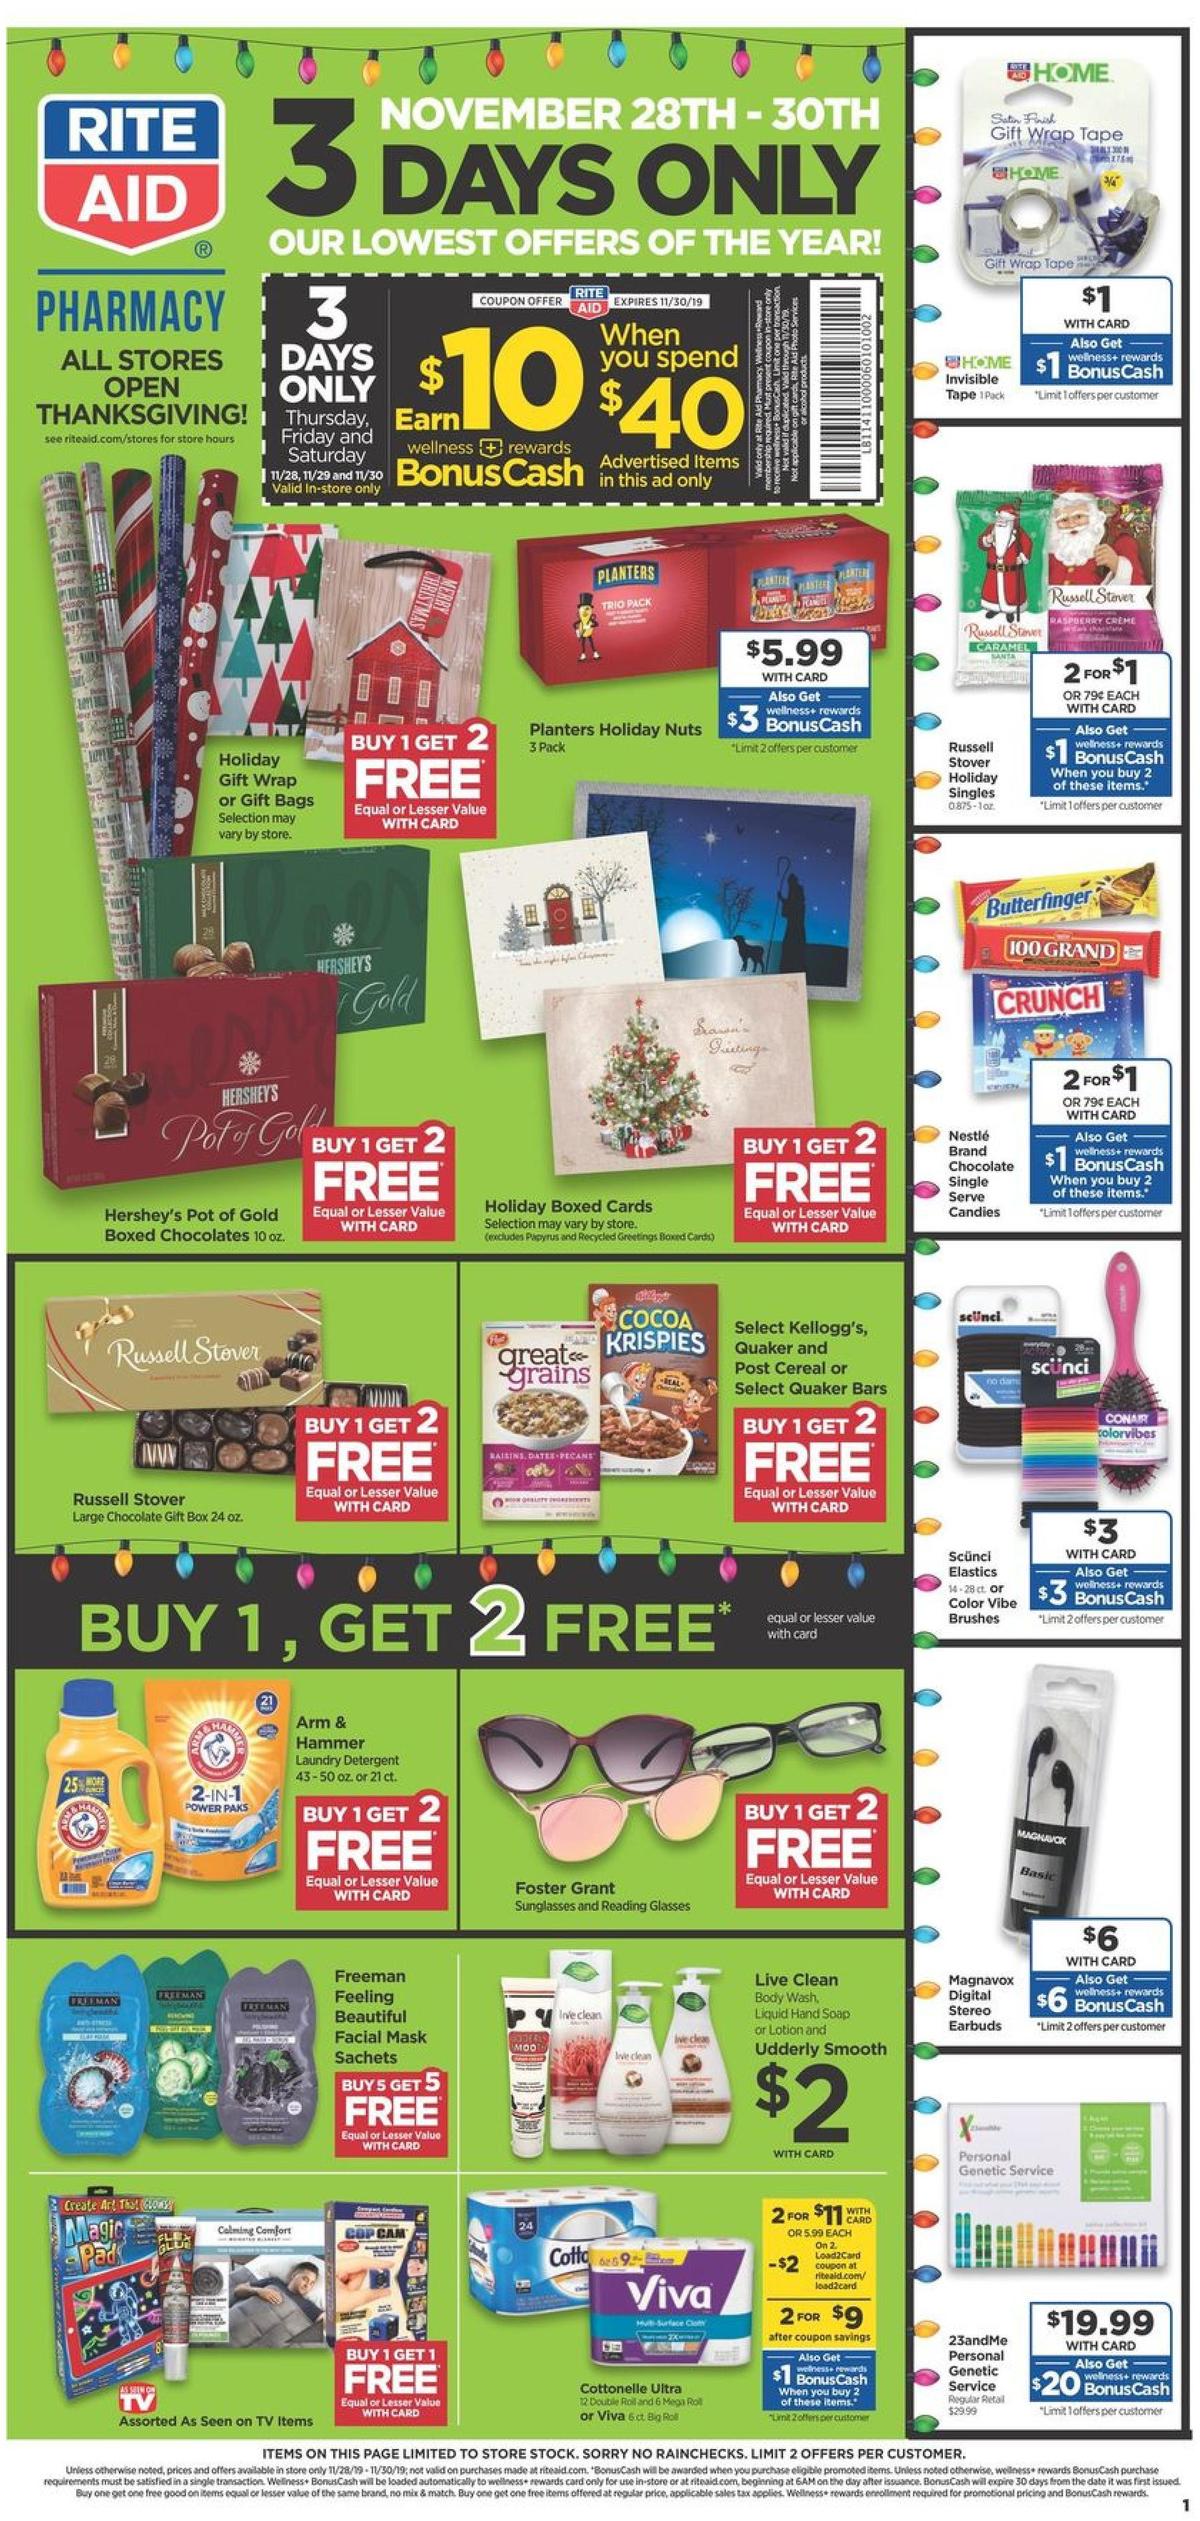 Rite Aid 3 Day Only Sale Weekly Ad from November 28